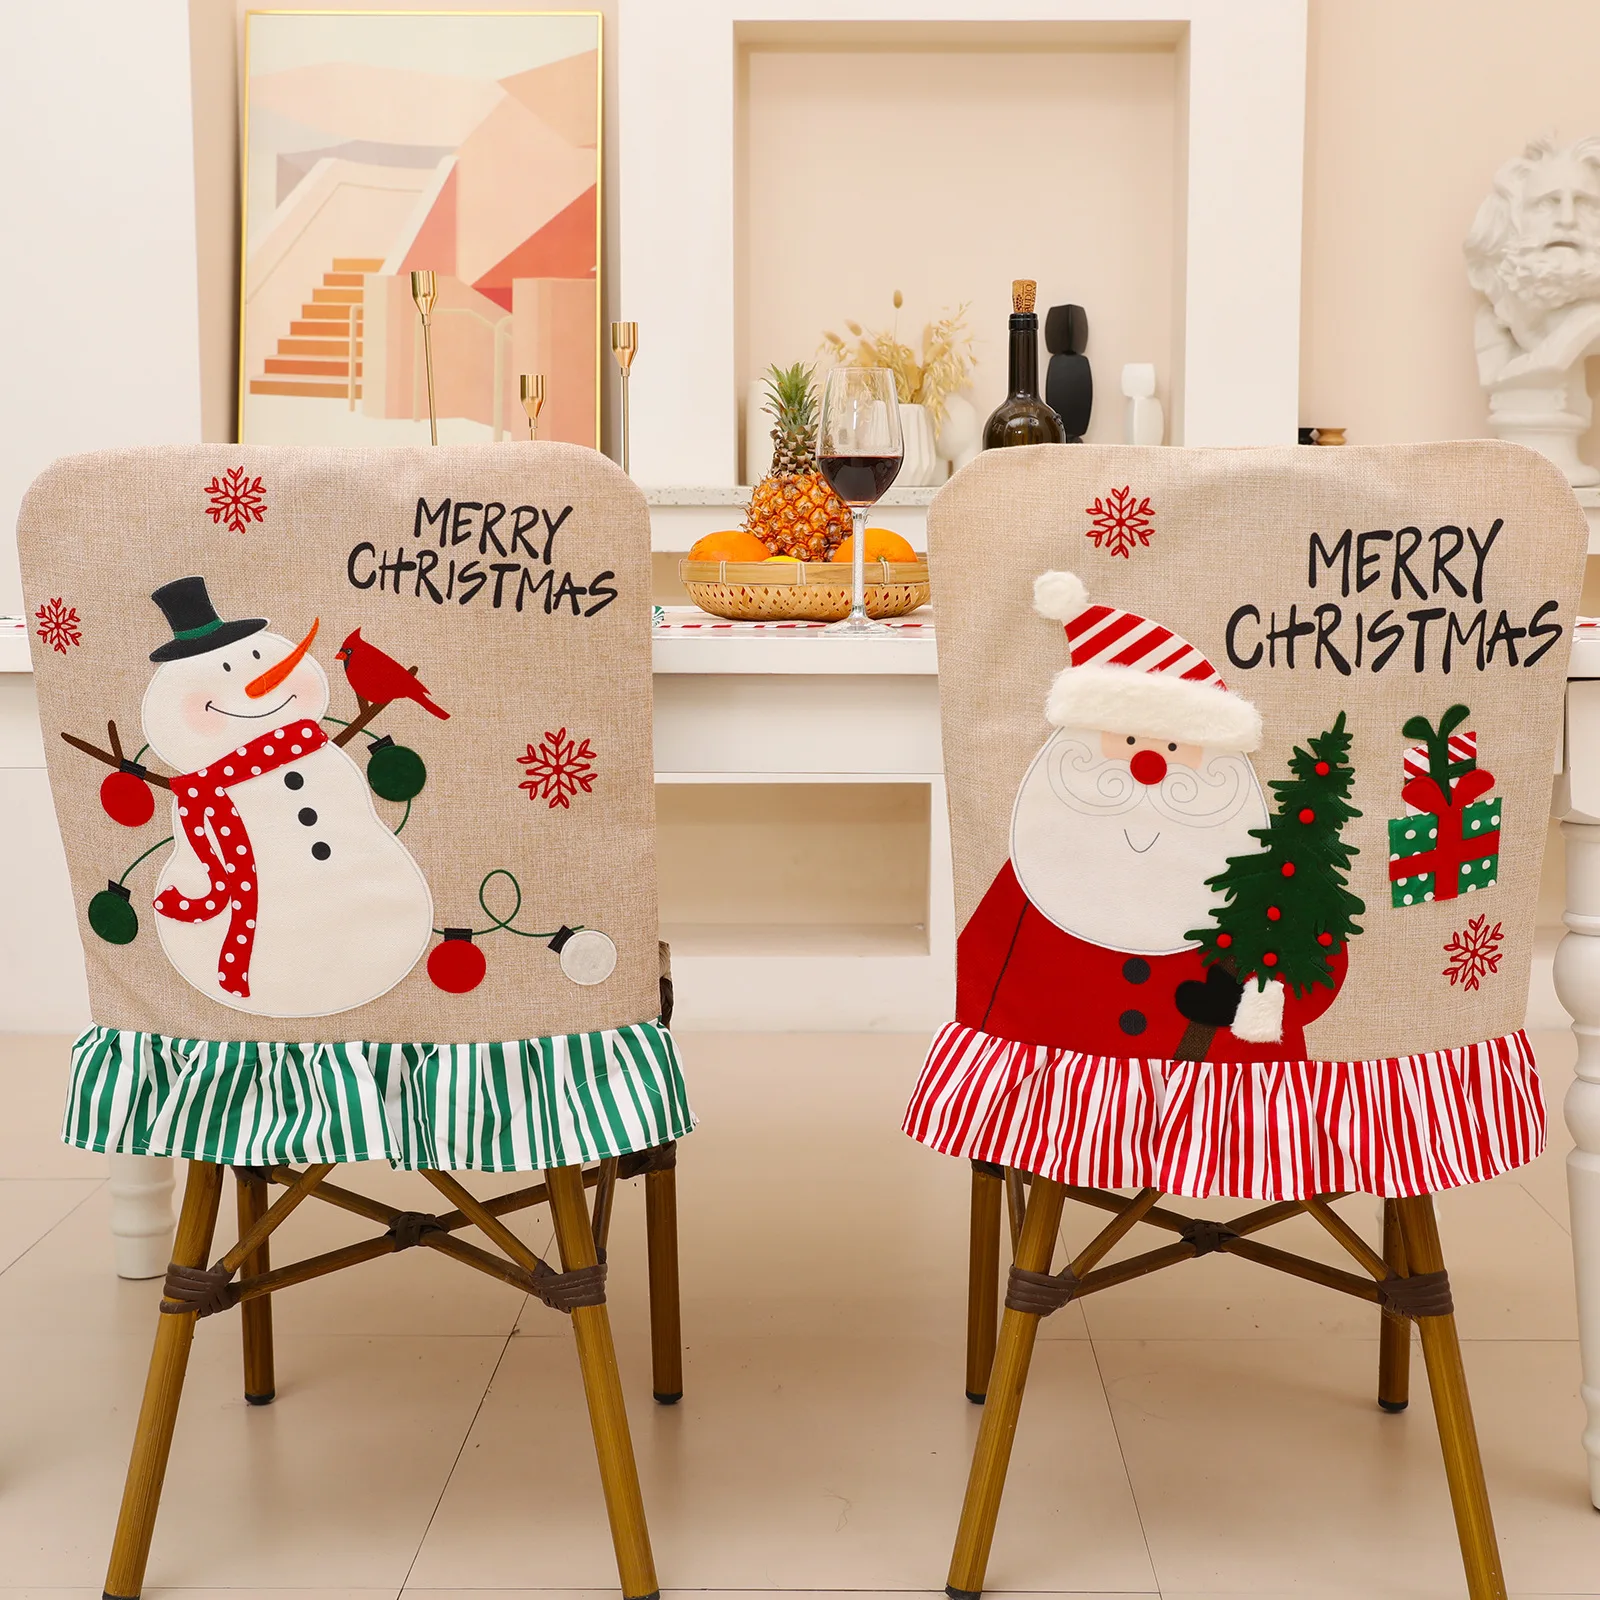 

Christmas Embroidery Chair Cover Snowman Santa Claus Noel Merry Christmas Decor For Home 2021 Happy New Year Naviidad Supplies